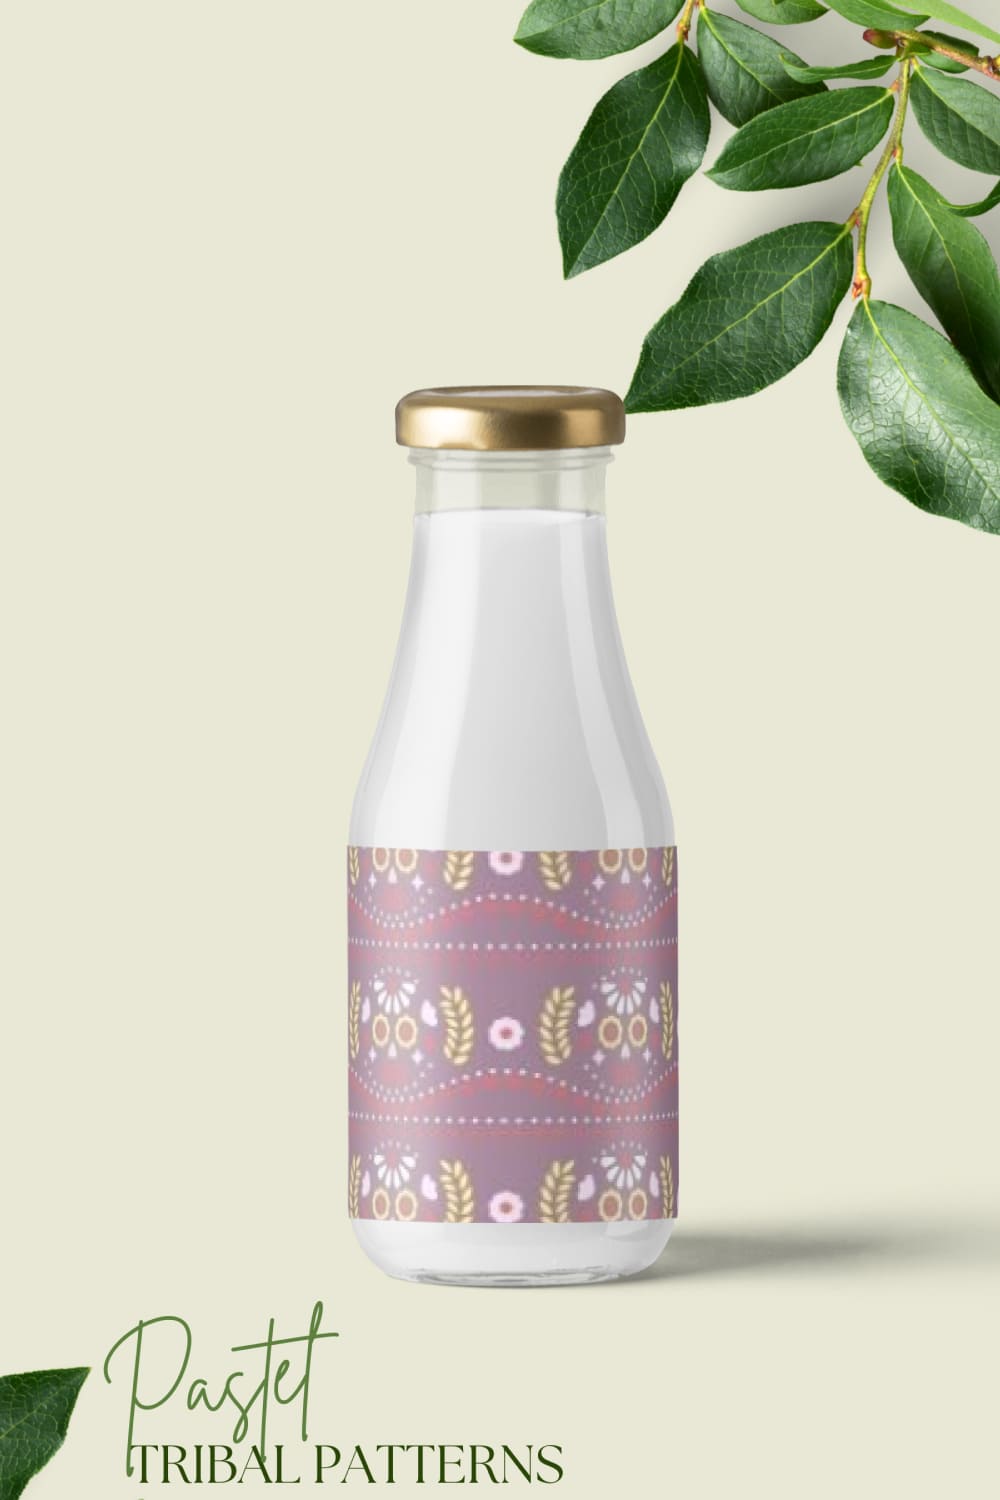 Image of a bottle with a beautiful tribal pattern in pastel colors.